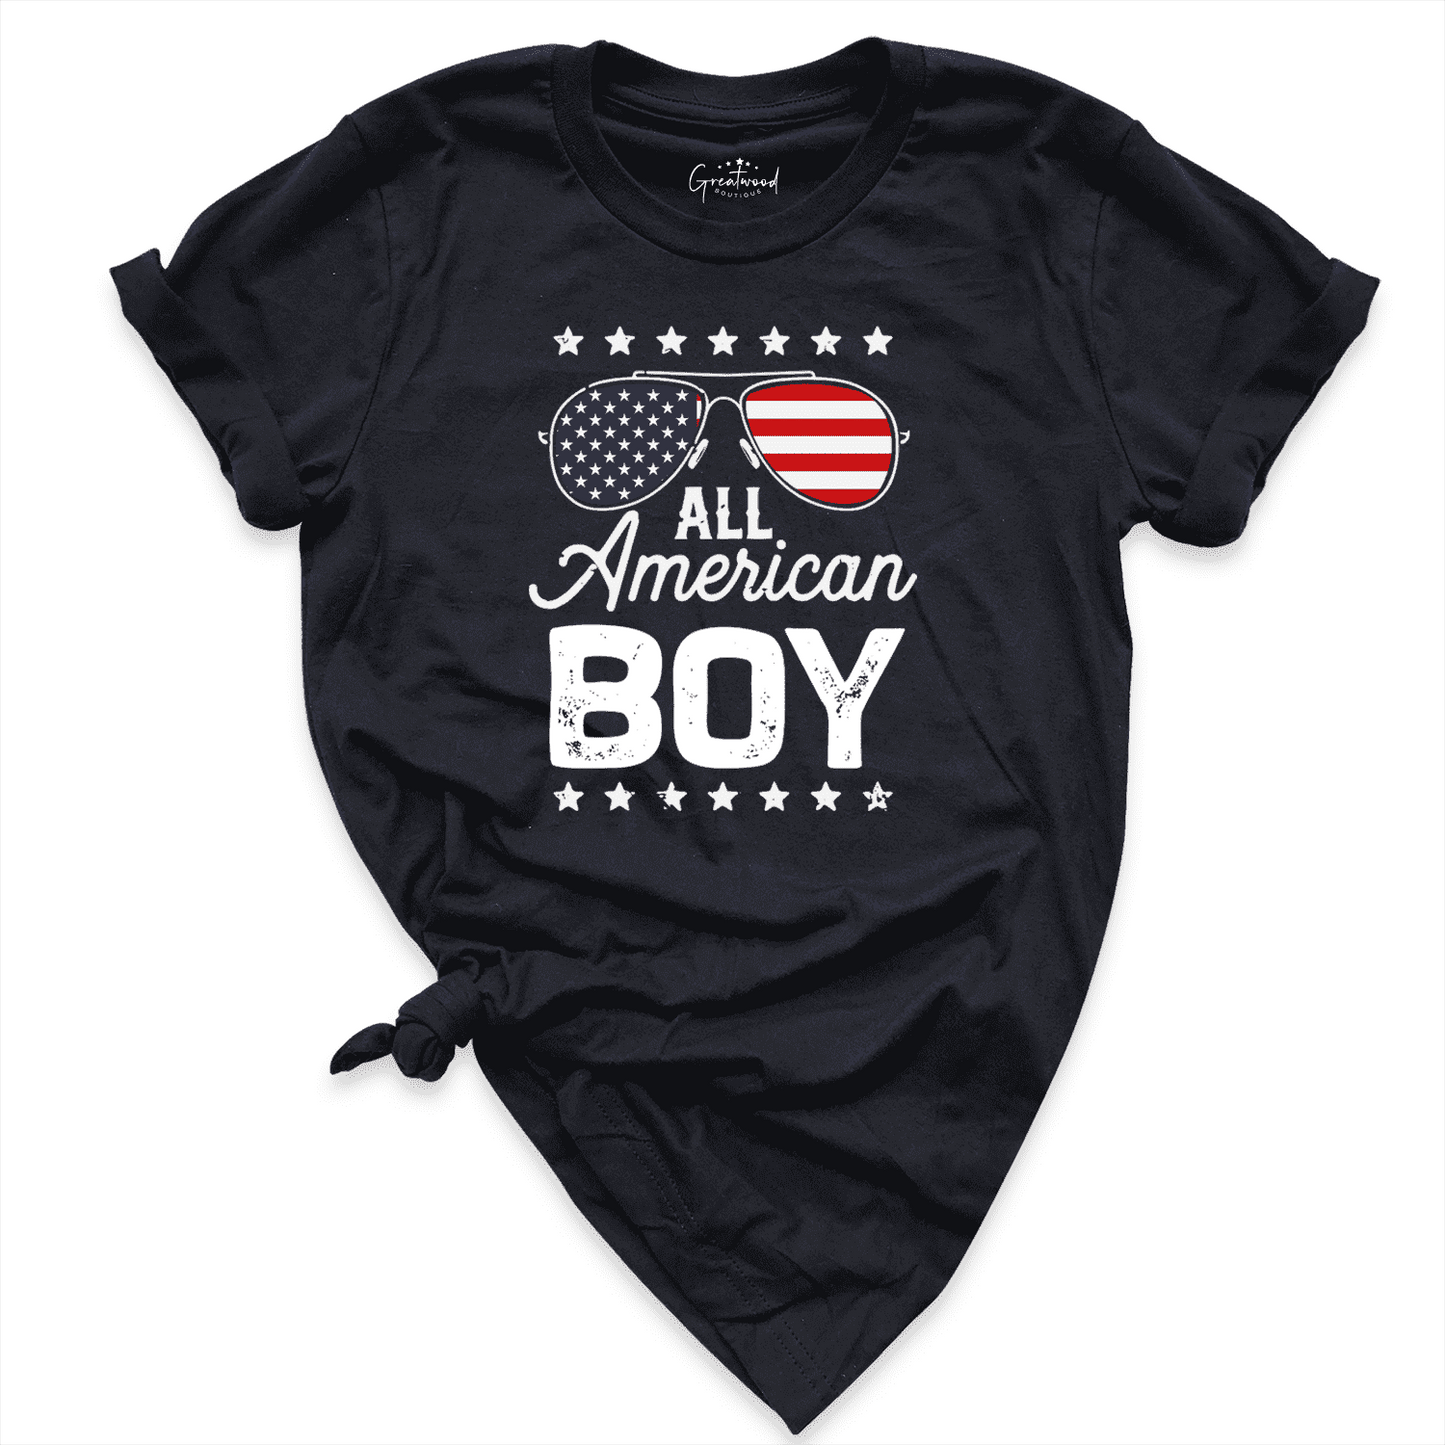 All American Boy Shirt Black - Greatwood Boutique